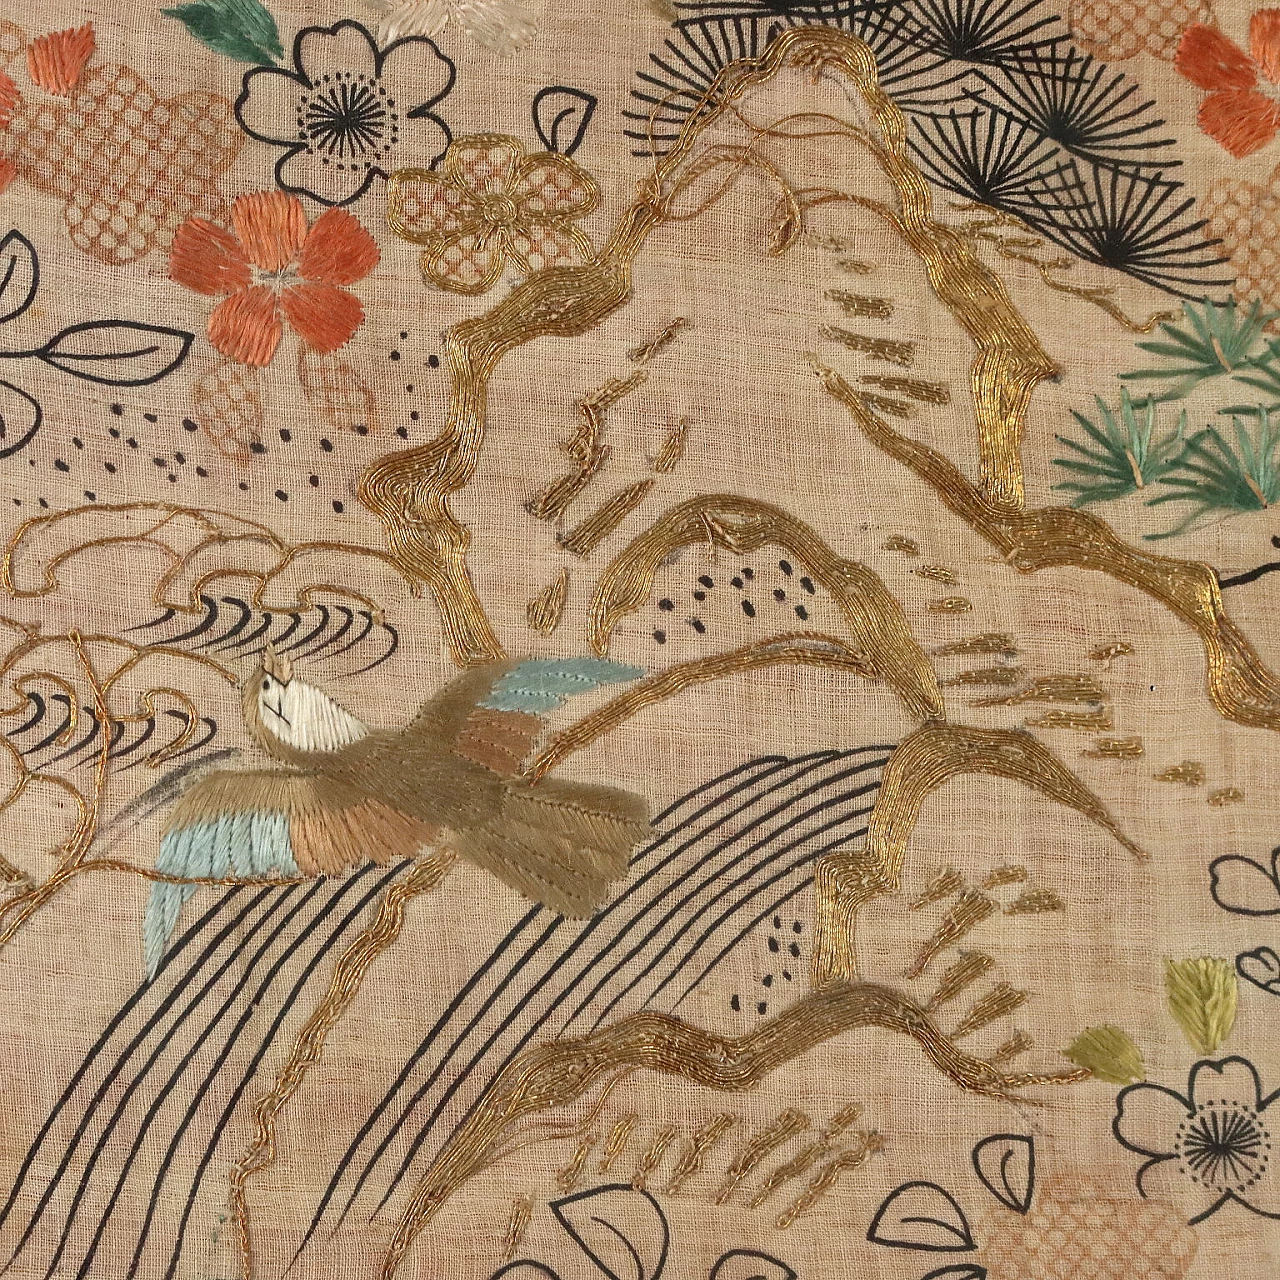 Naturalistic subject, embroidery panel, late 19th century 6